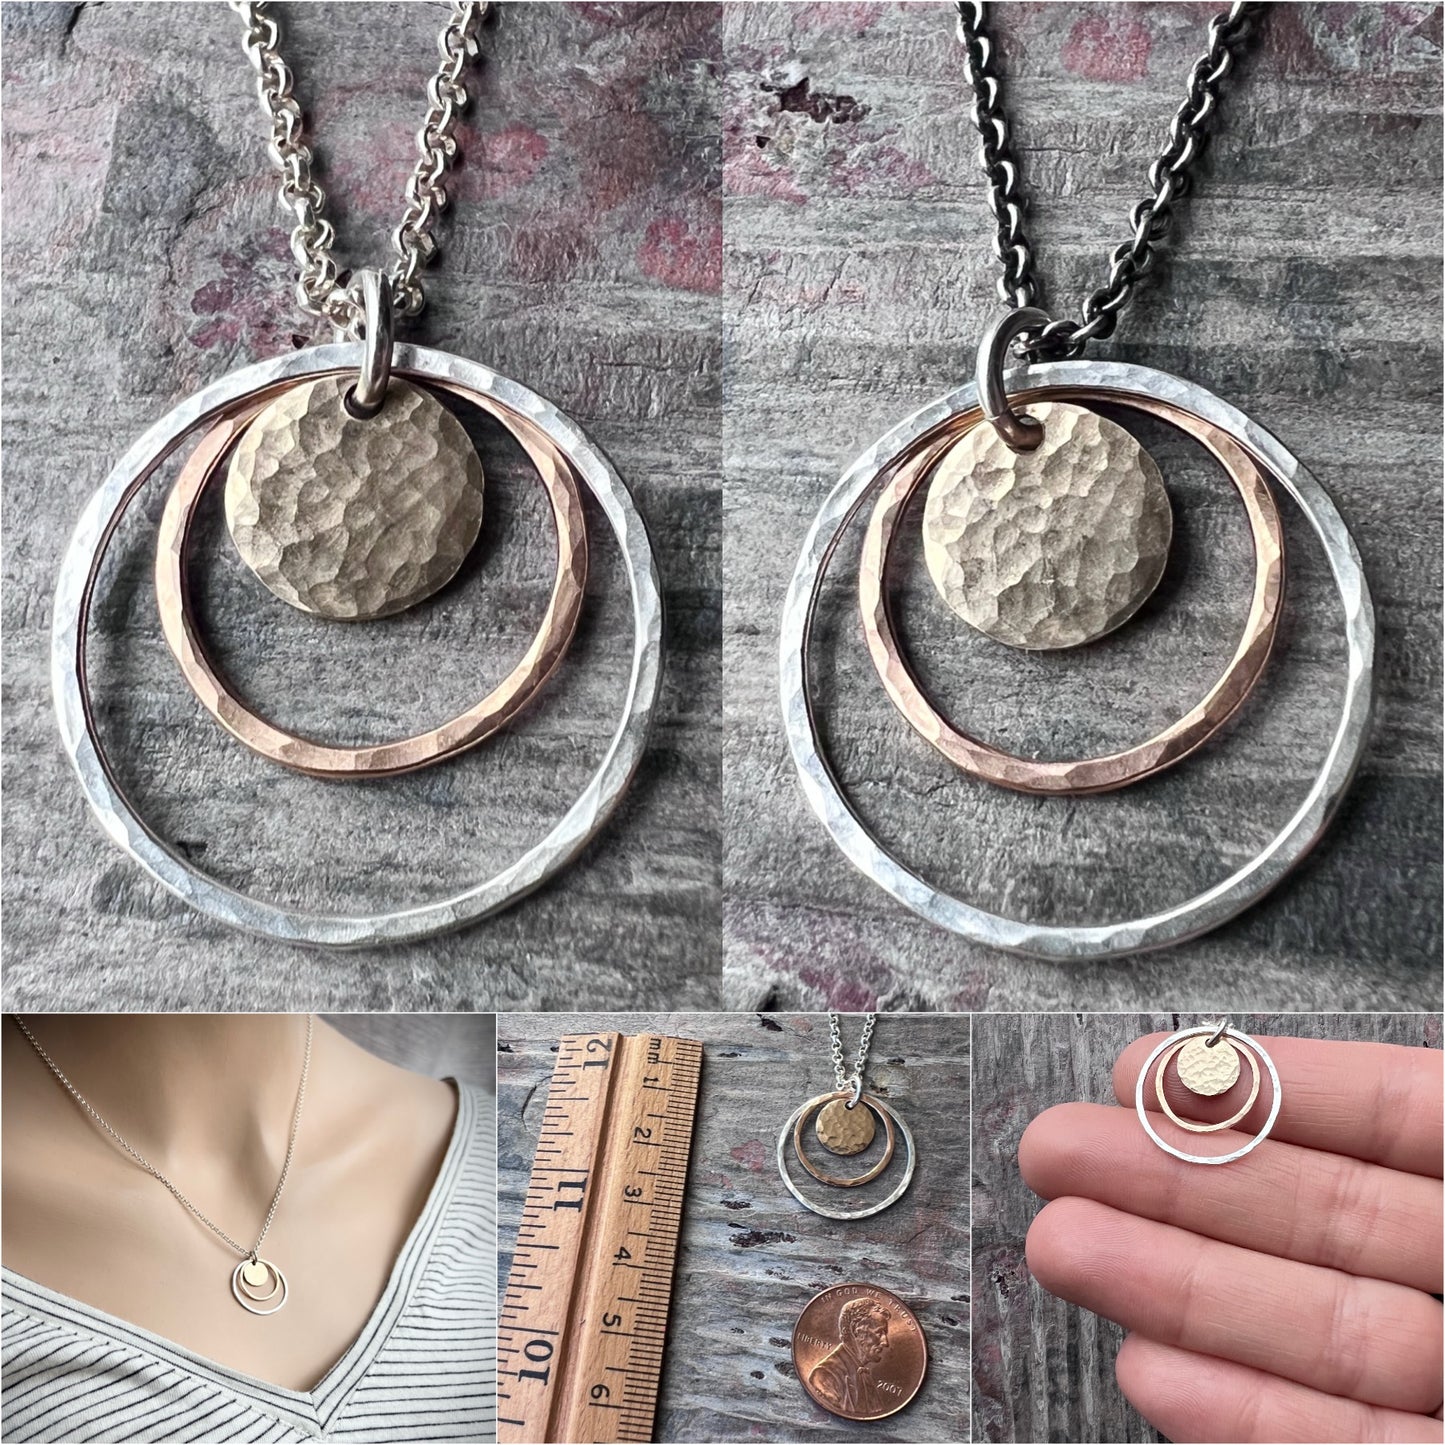 14k Goldfill and Sterling Silver Necklace | Mixed Metal Hammered Gold and Silver Circles Pendant Necklace